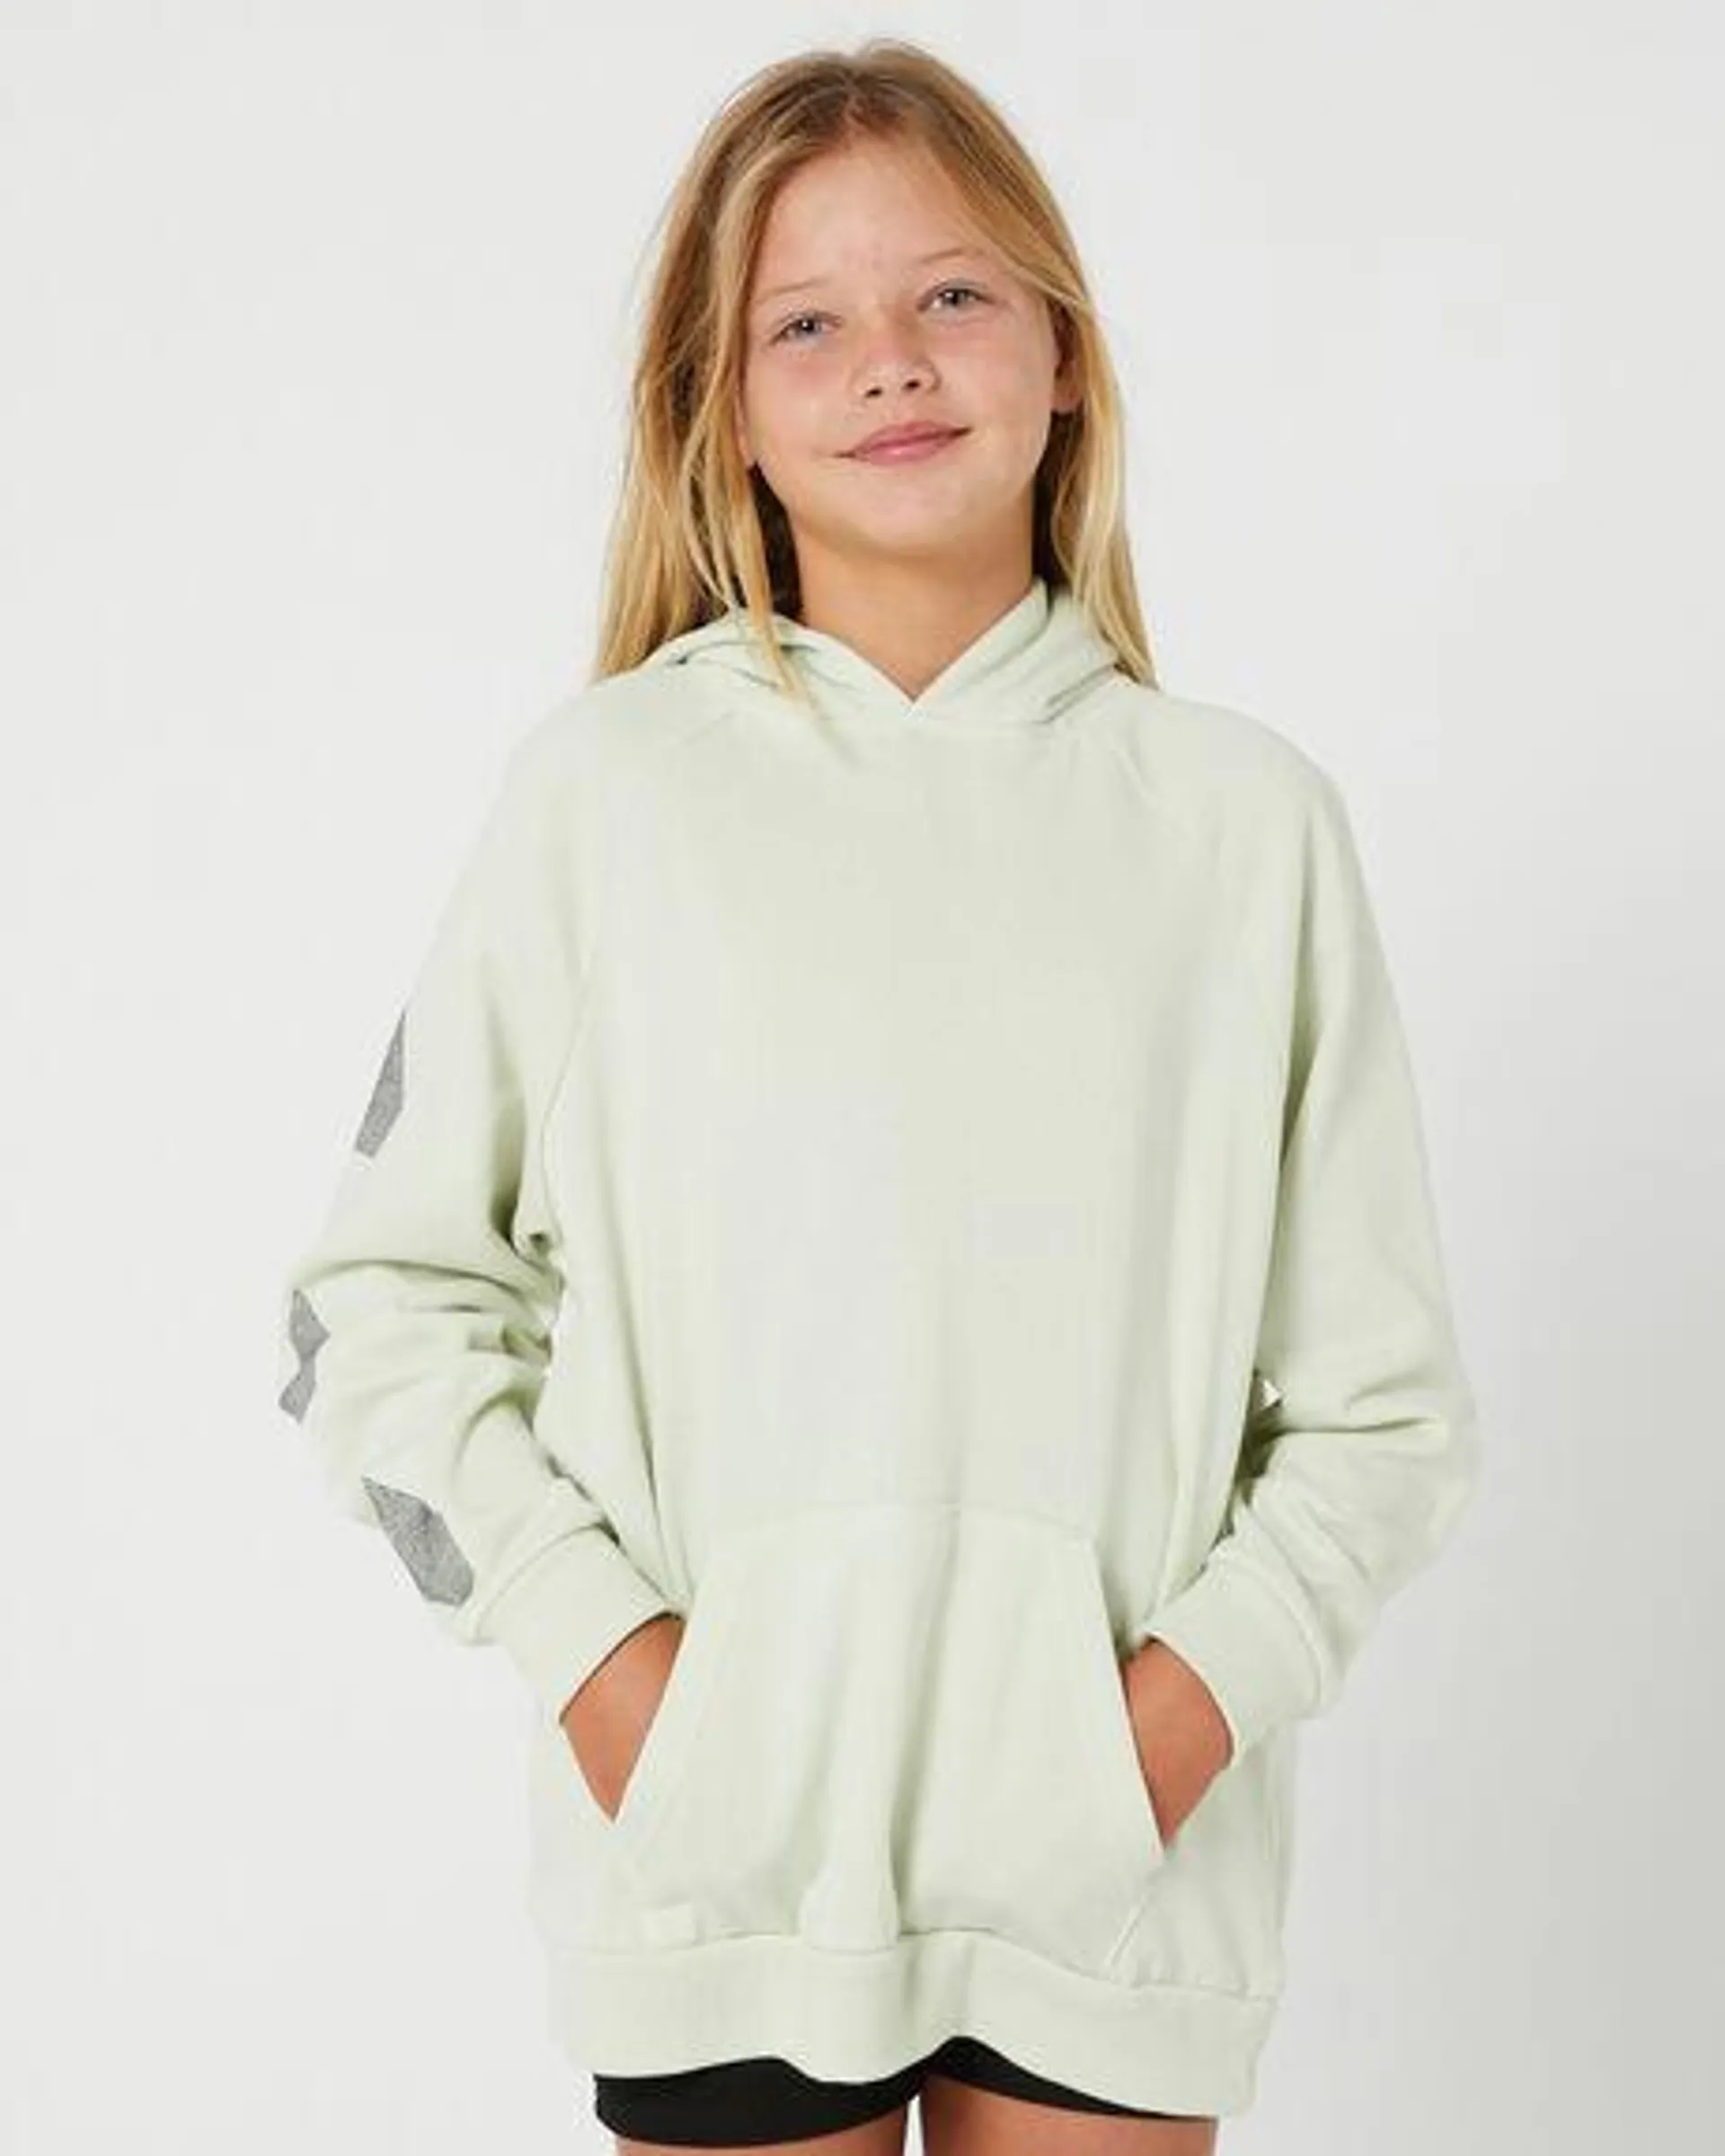 Truly Stoked Bf Pullover - Teens